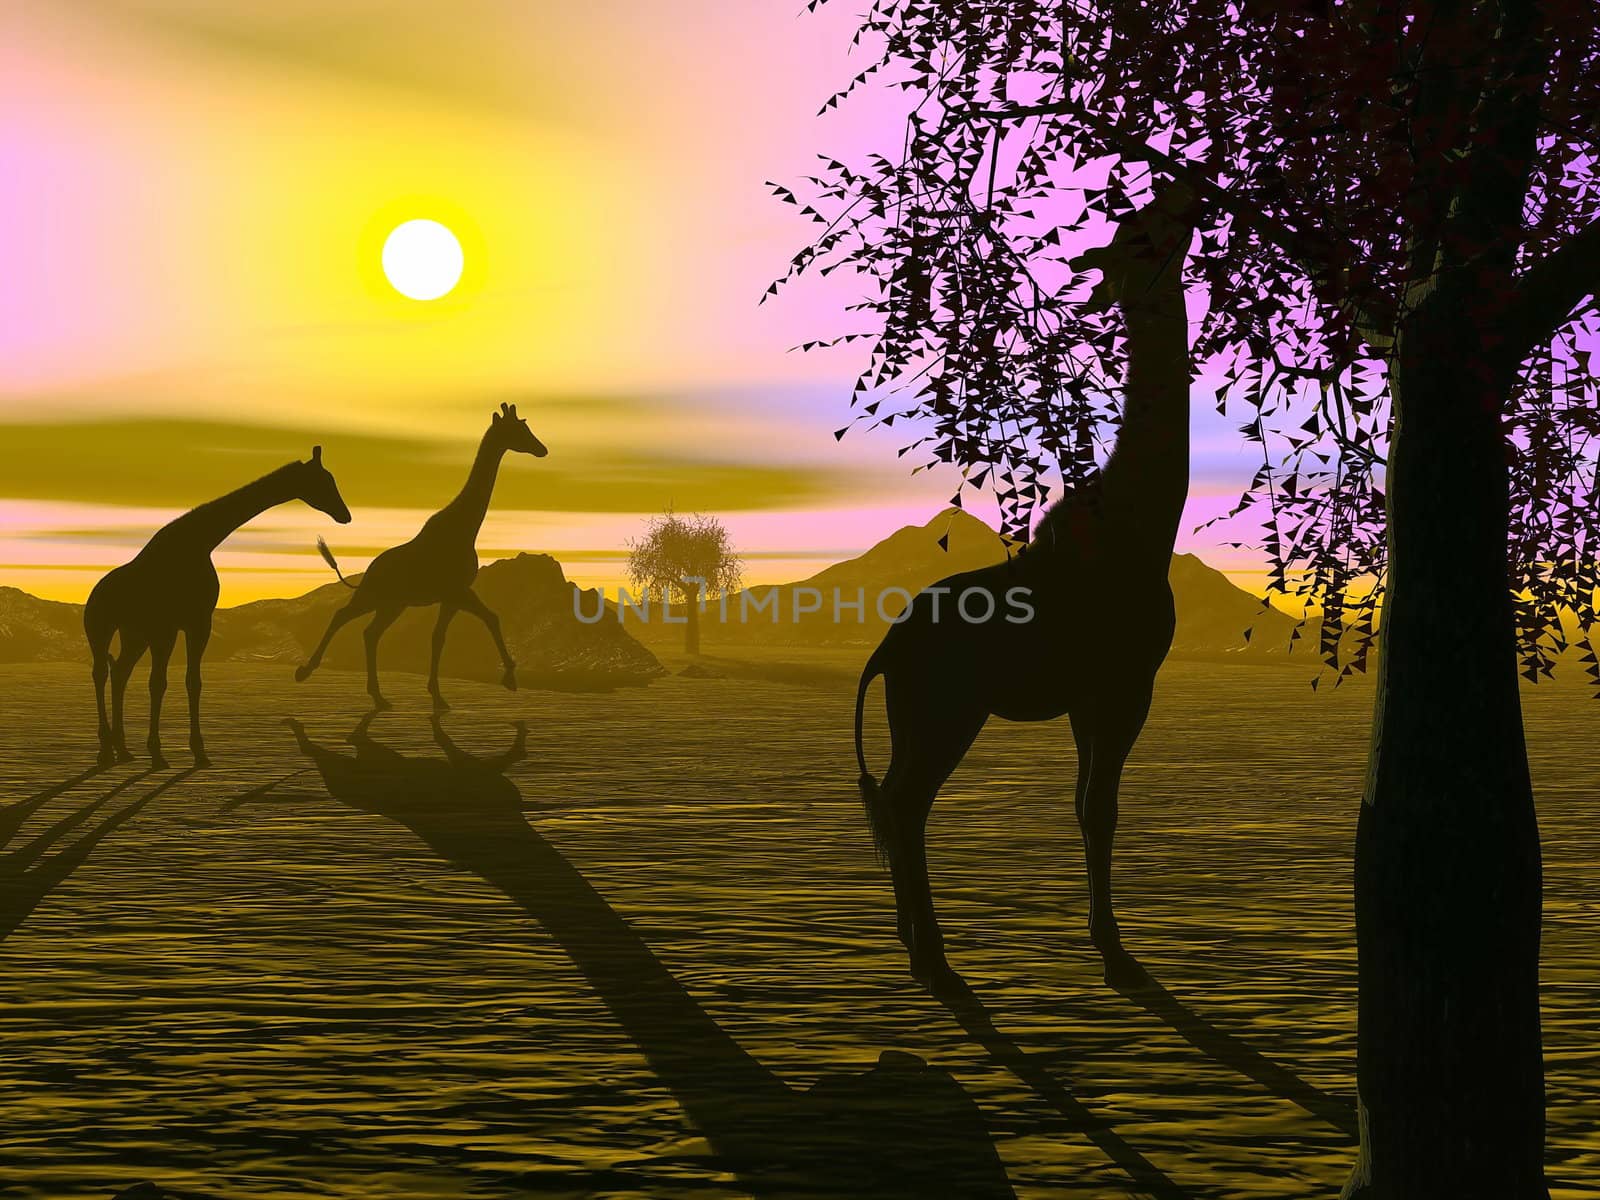 Shadow of three giraffes in the savannah by sunset